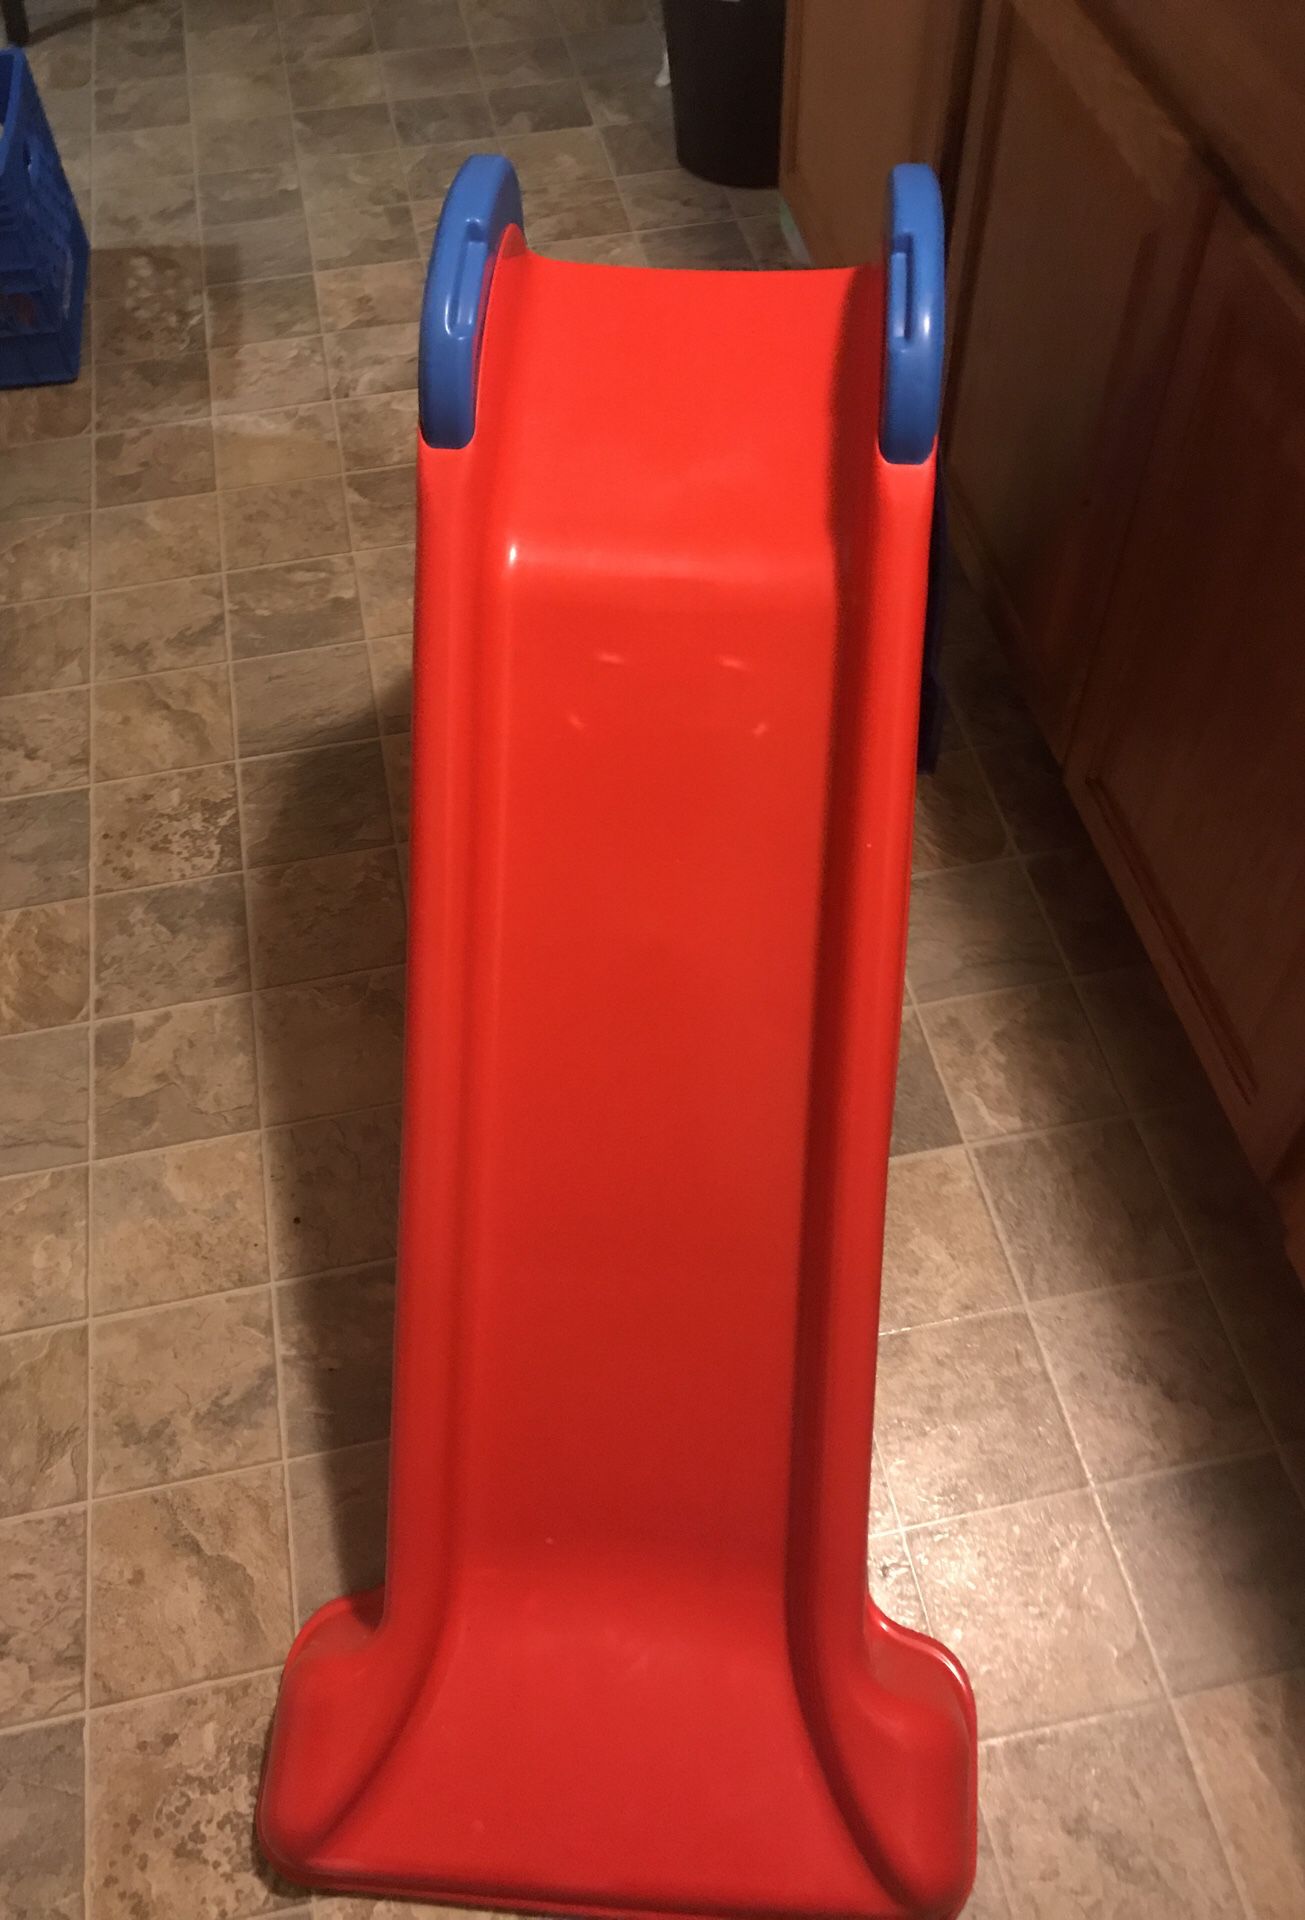 Little Tikes first slide & Children play rug, pick up only auburn area